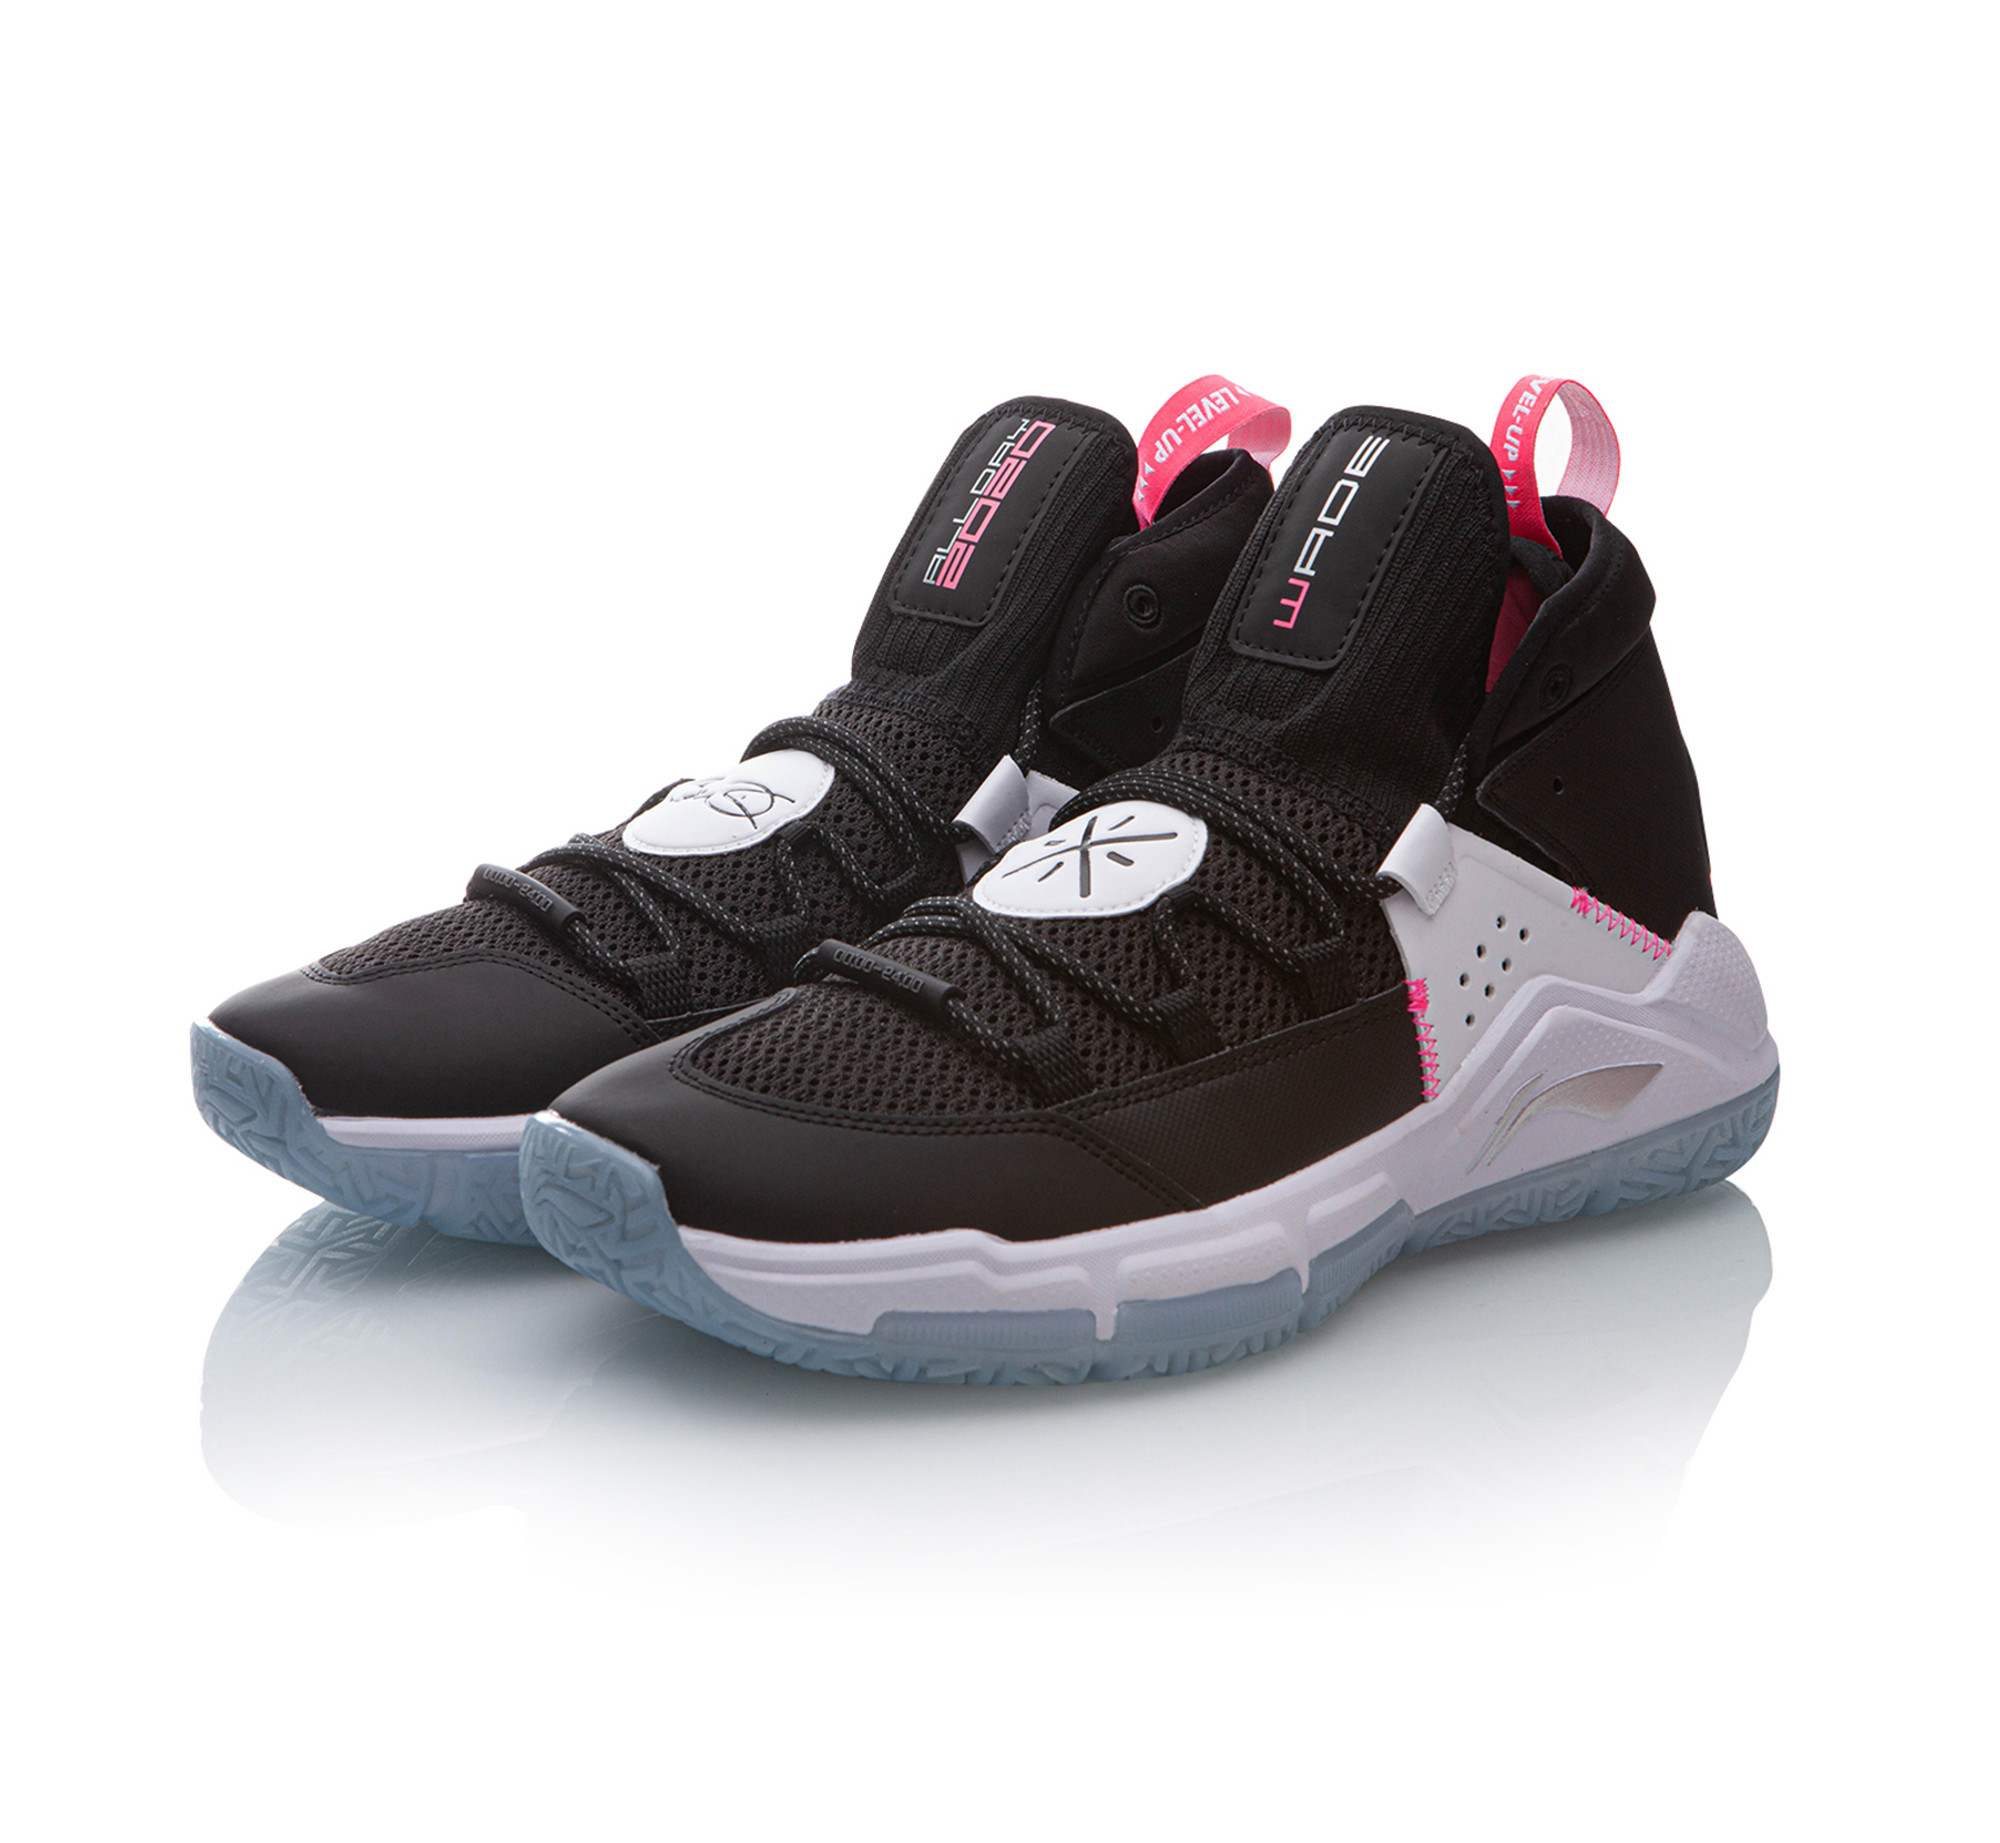 Wade All Day 5 Basketball Shoe | Shop online now at Sunlight Station